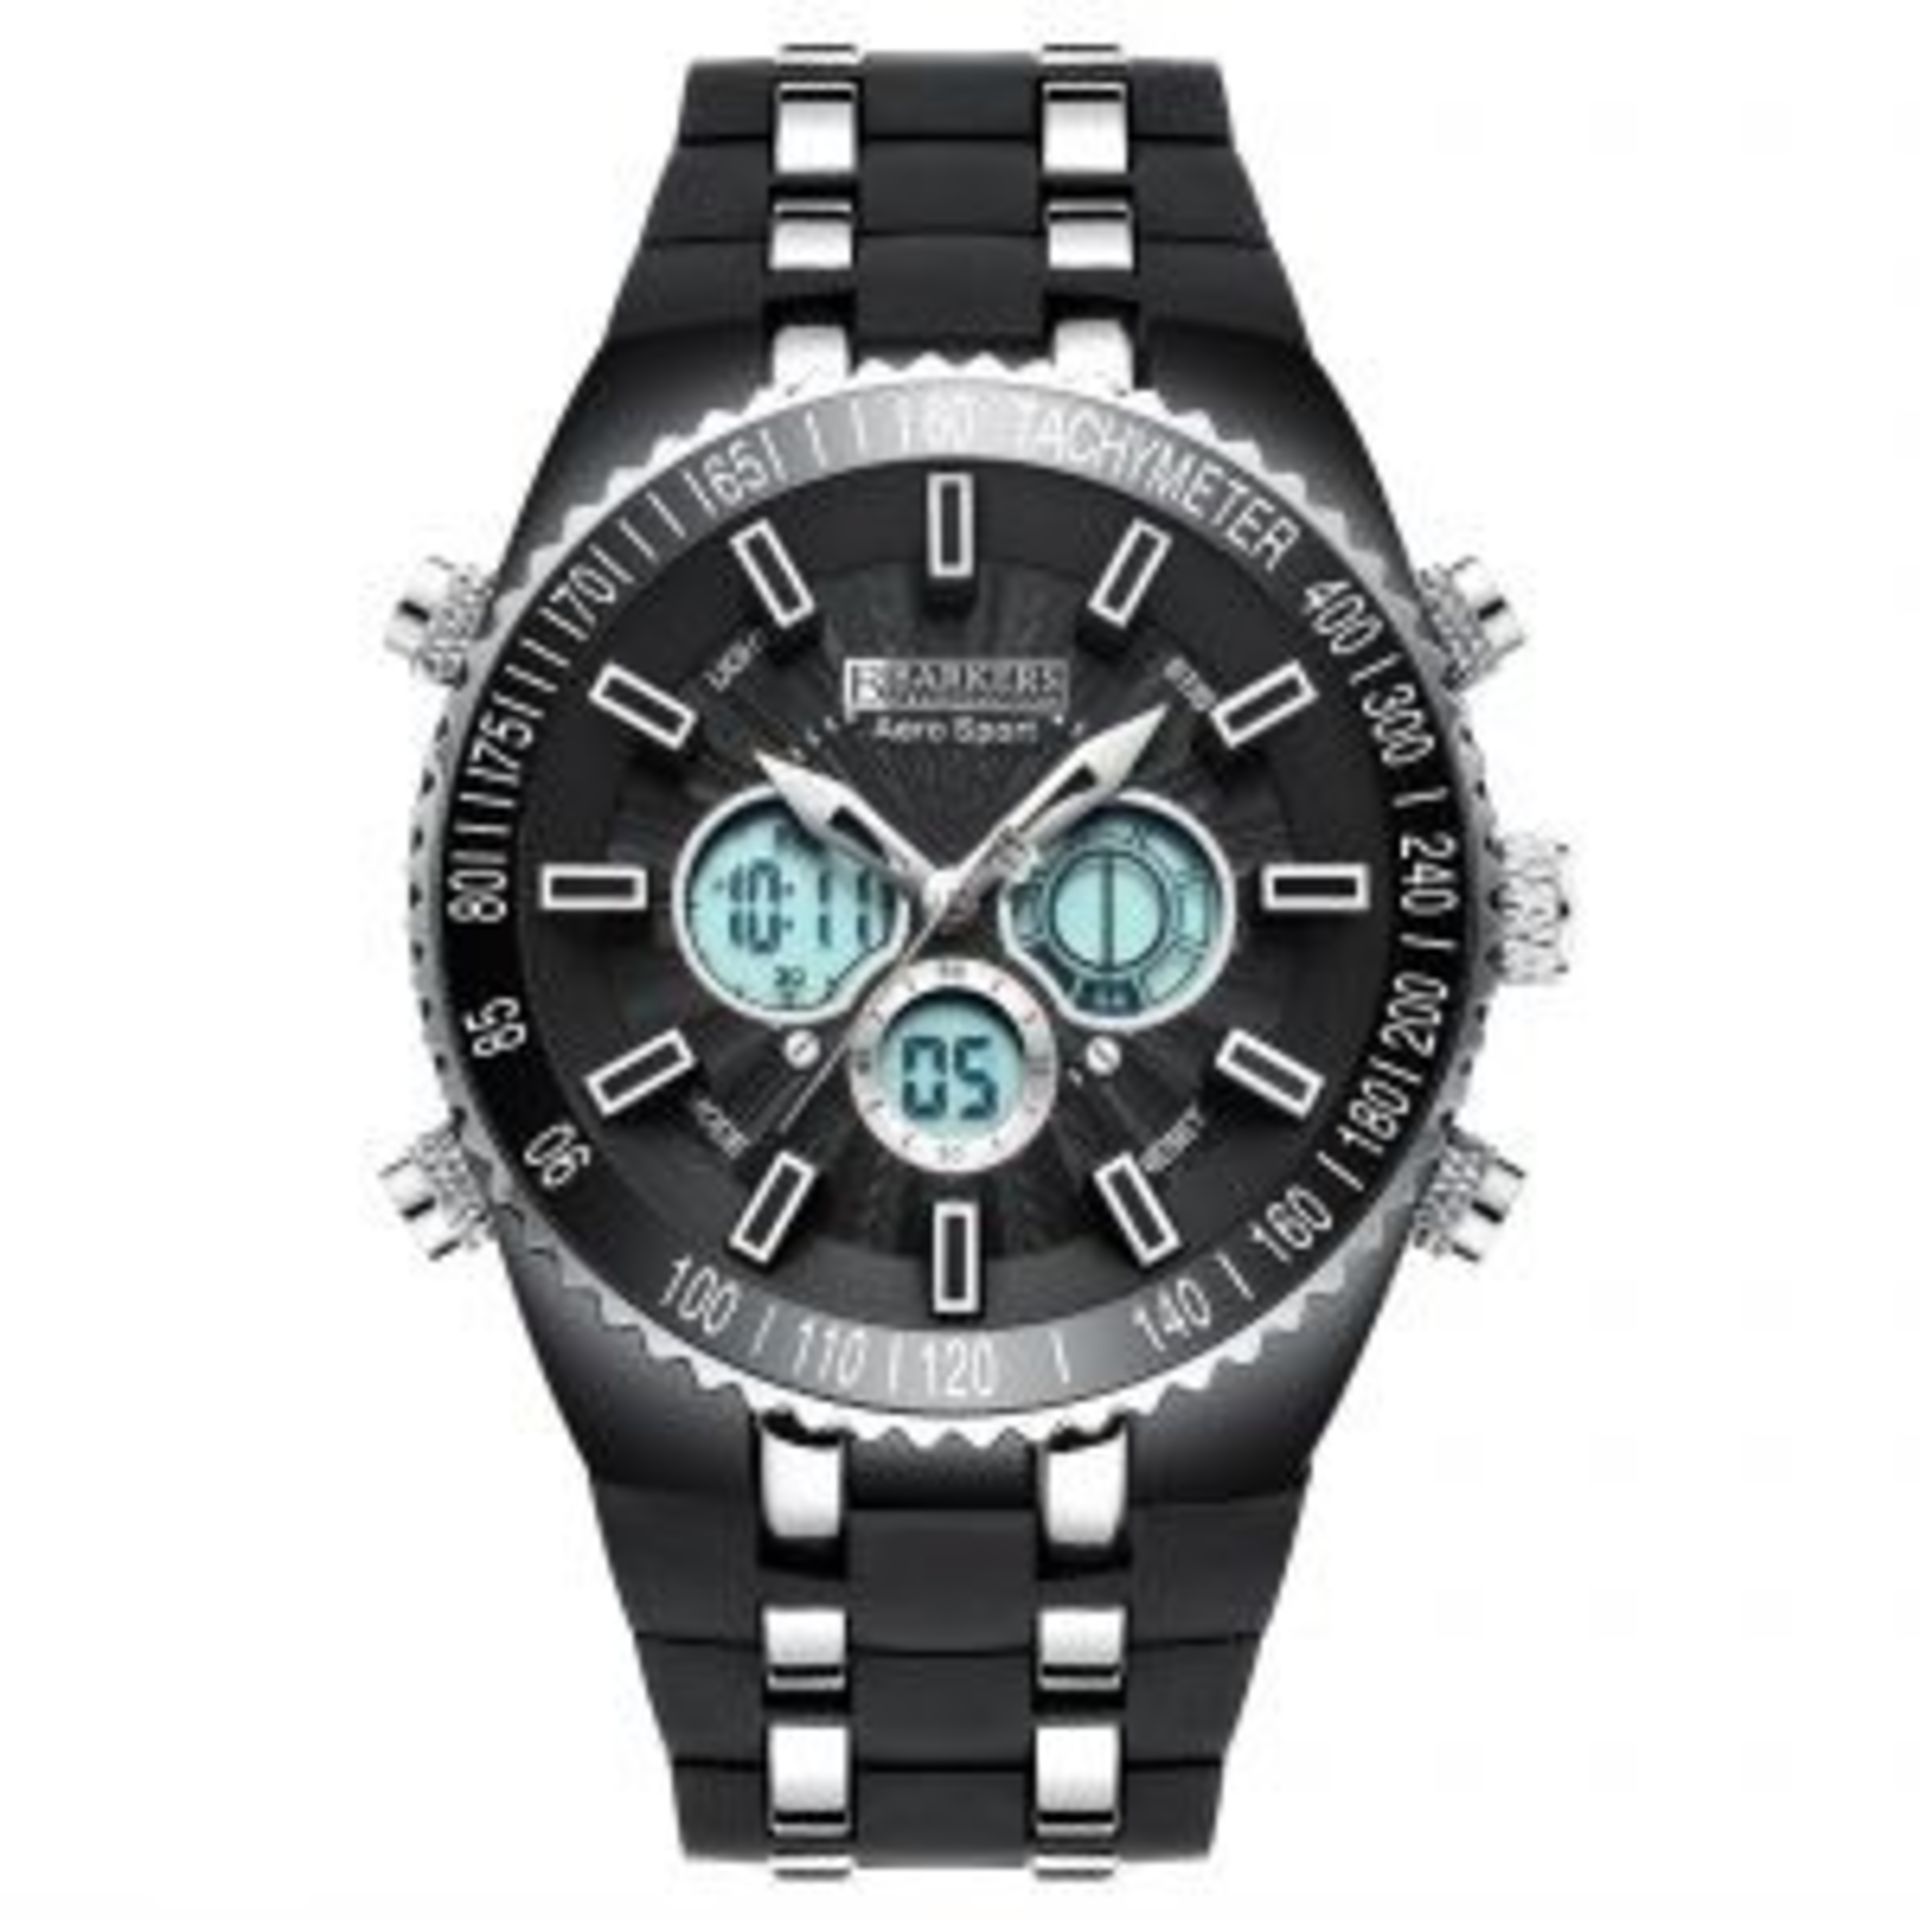 1 BRAND NEW BOXED BARKERS OF KENSINGTON AERO SPORT WATCH IN BLACK / RRP £425.00 (VIEWING HIGHLY